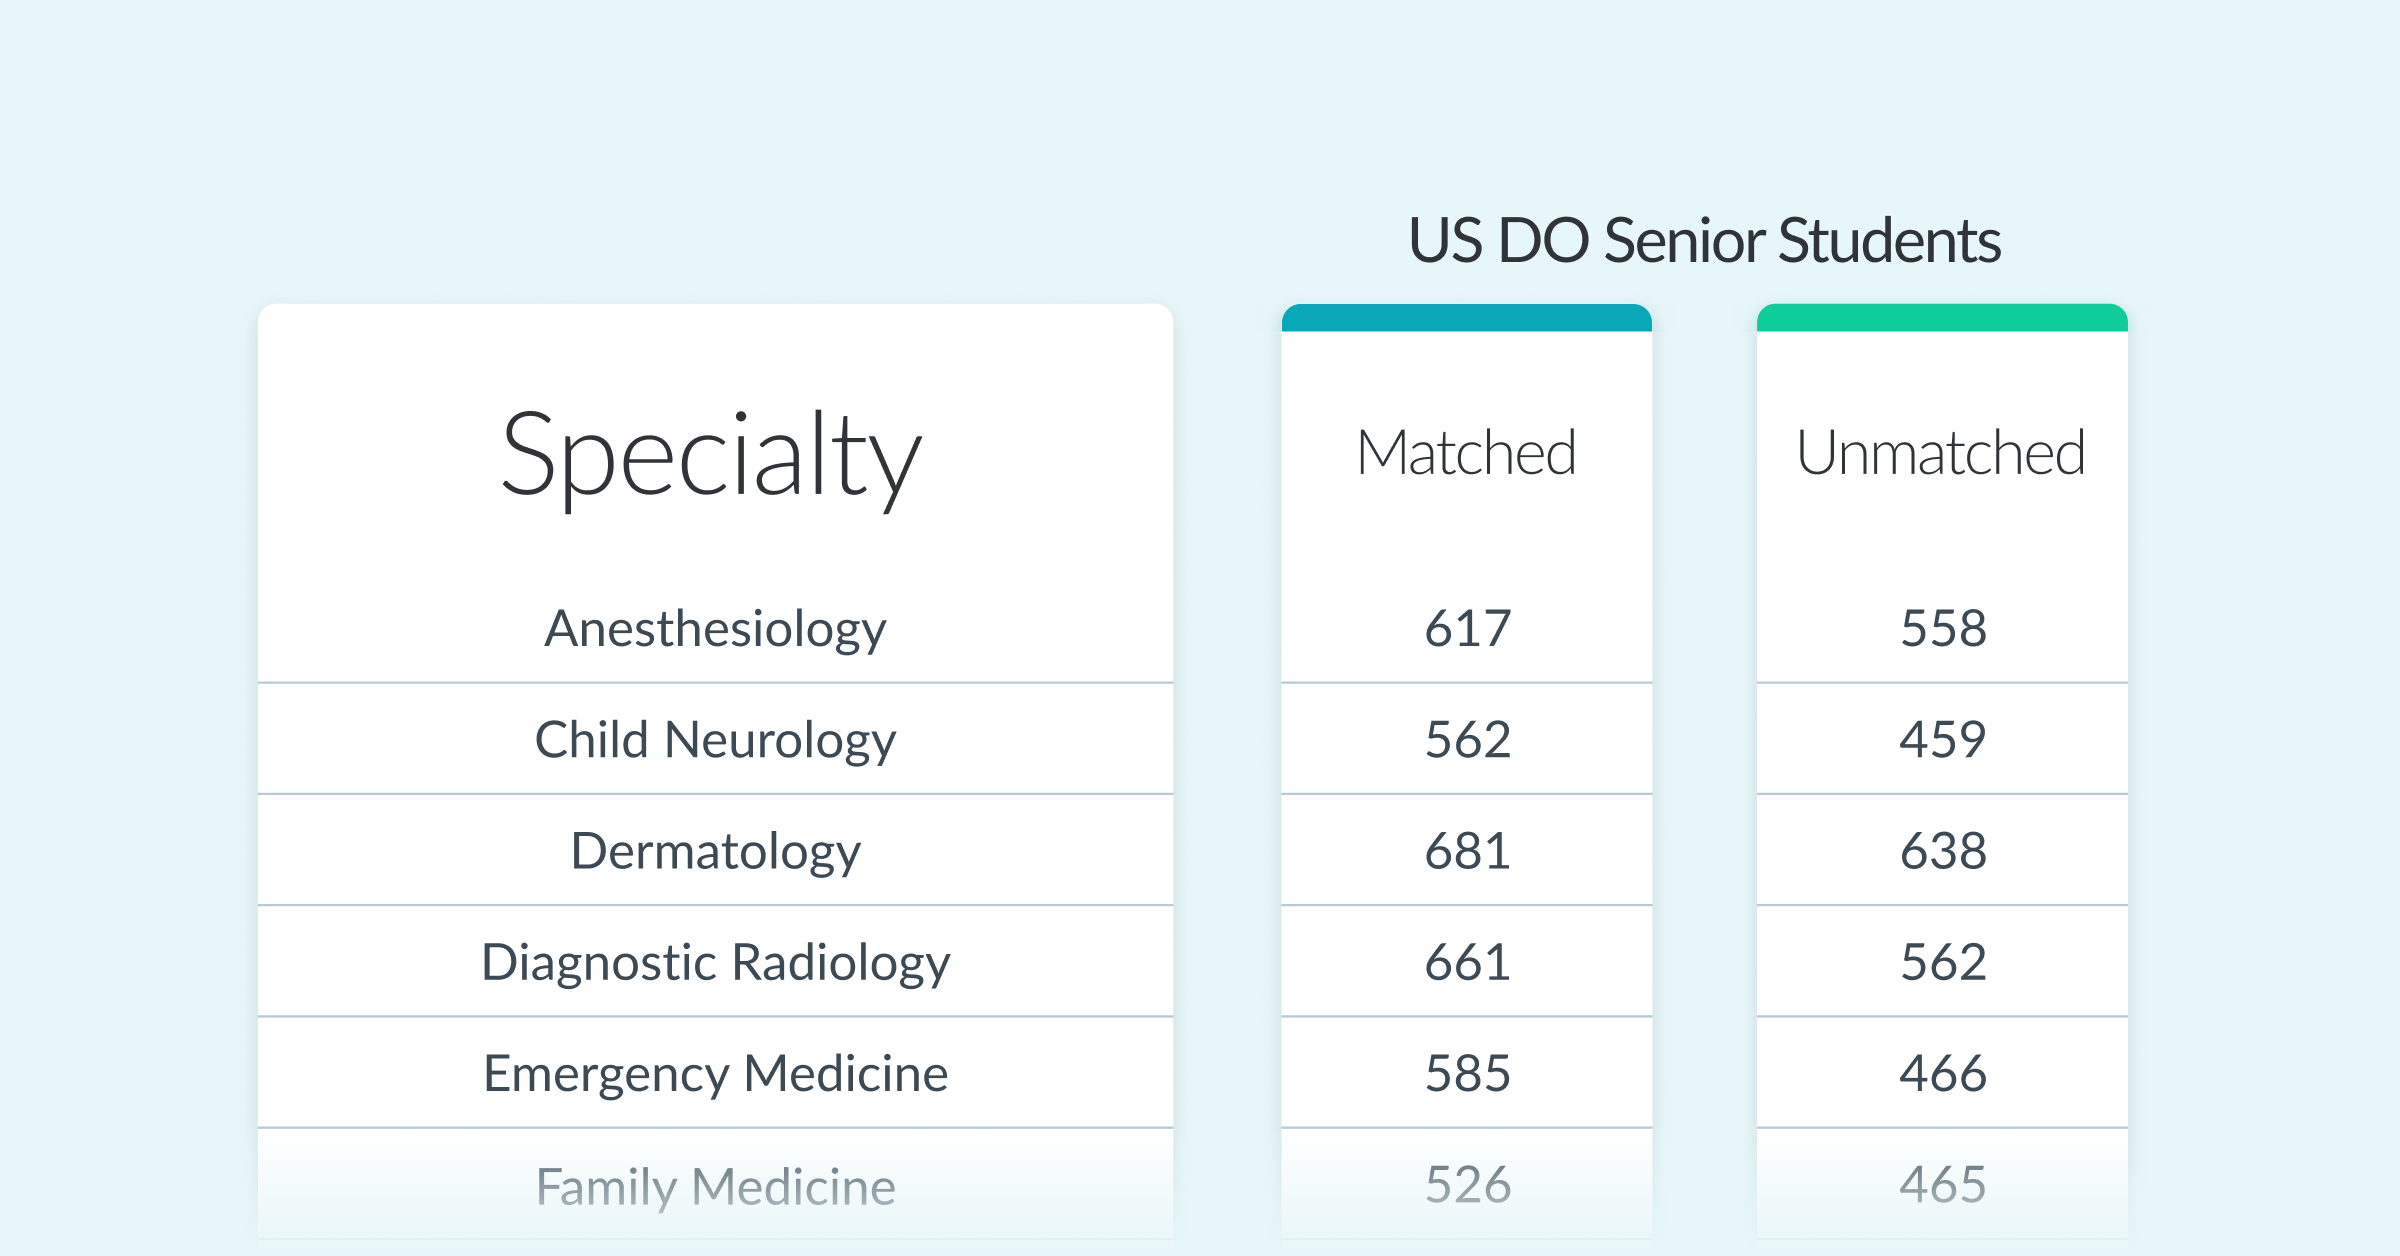 Average COMLEX® Match Scores by Medical Specialty 2022